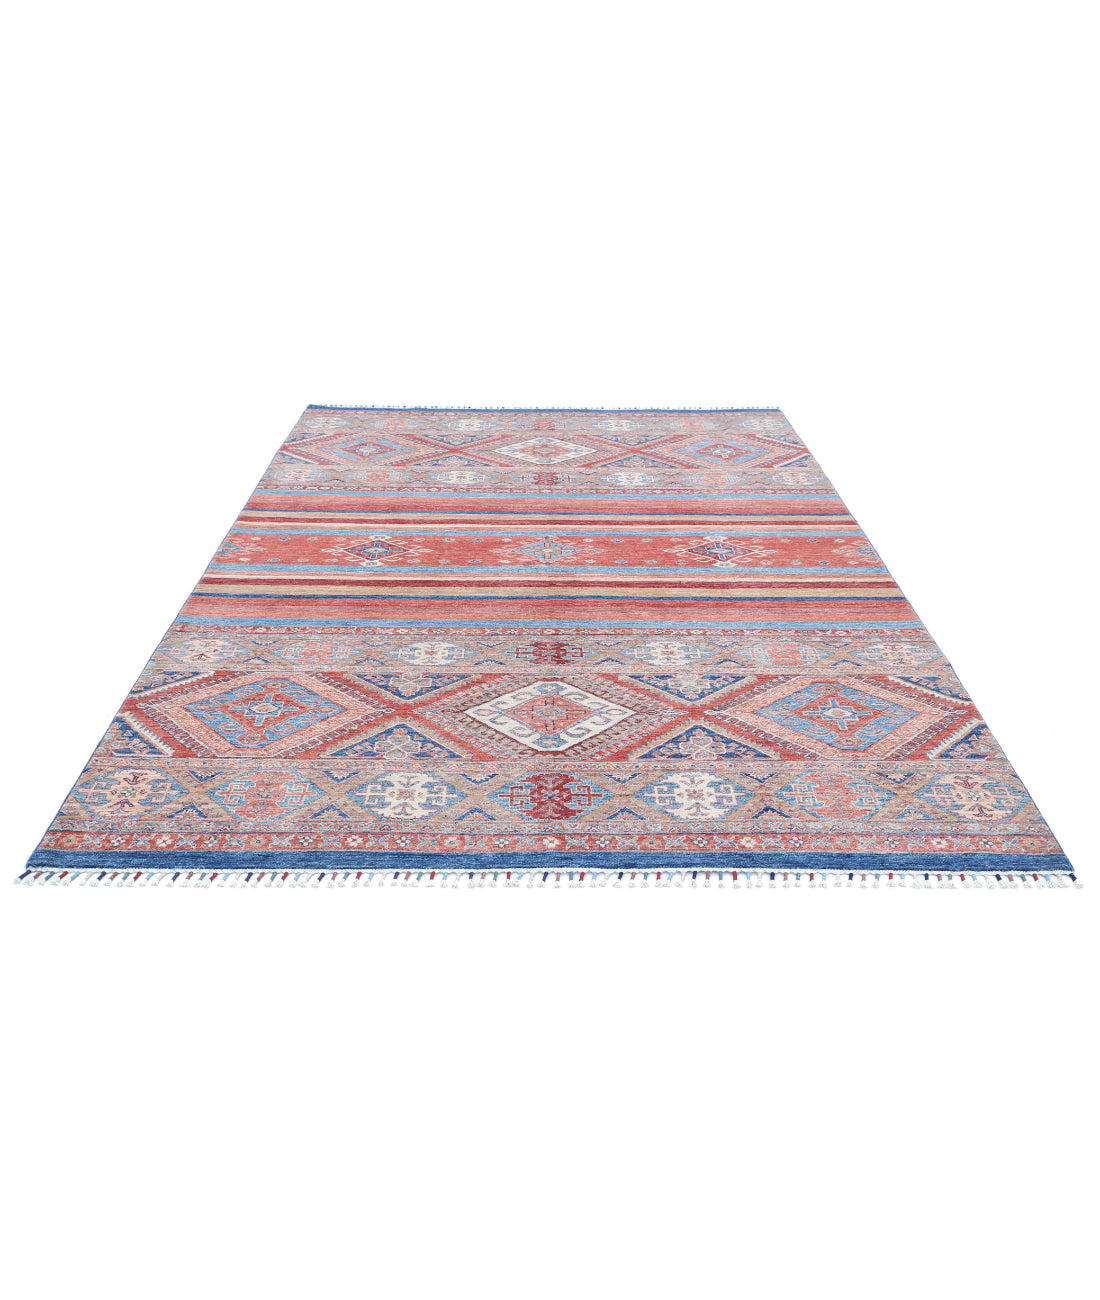 Hand Knotted Khurjeen Wool Rug - 6'8'' x 9'7'' 6'8'' x 9'7'' (200 X 288) / Multi / Multi